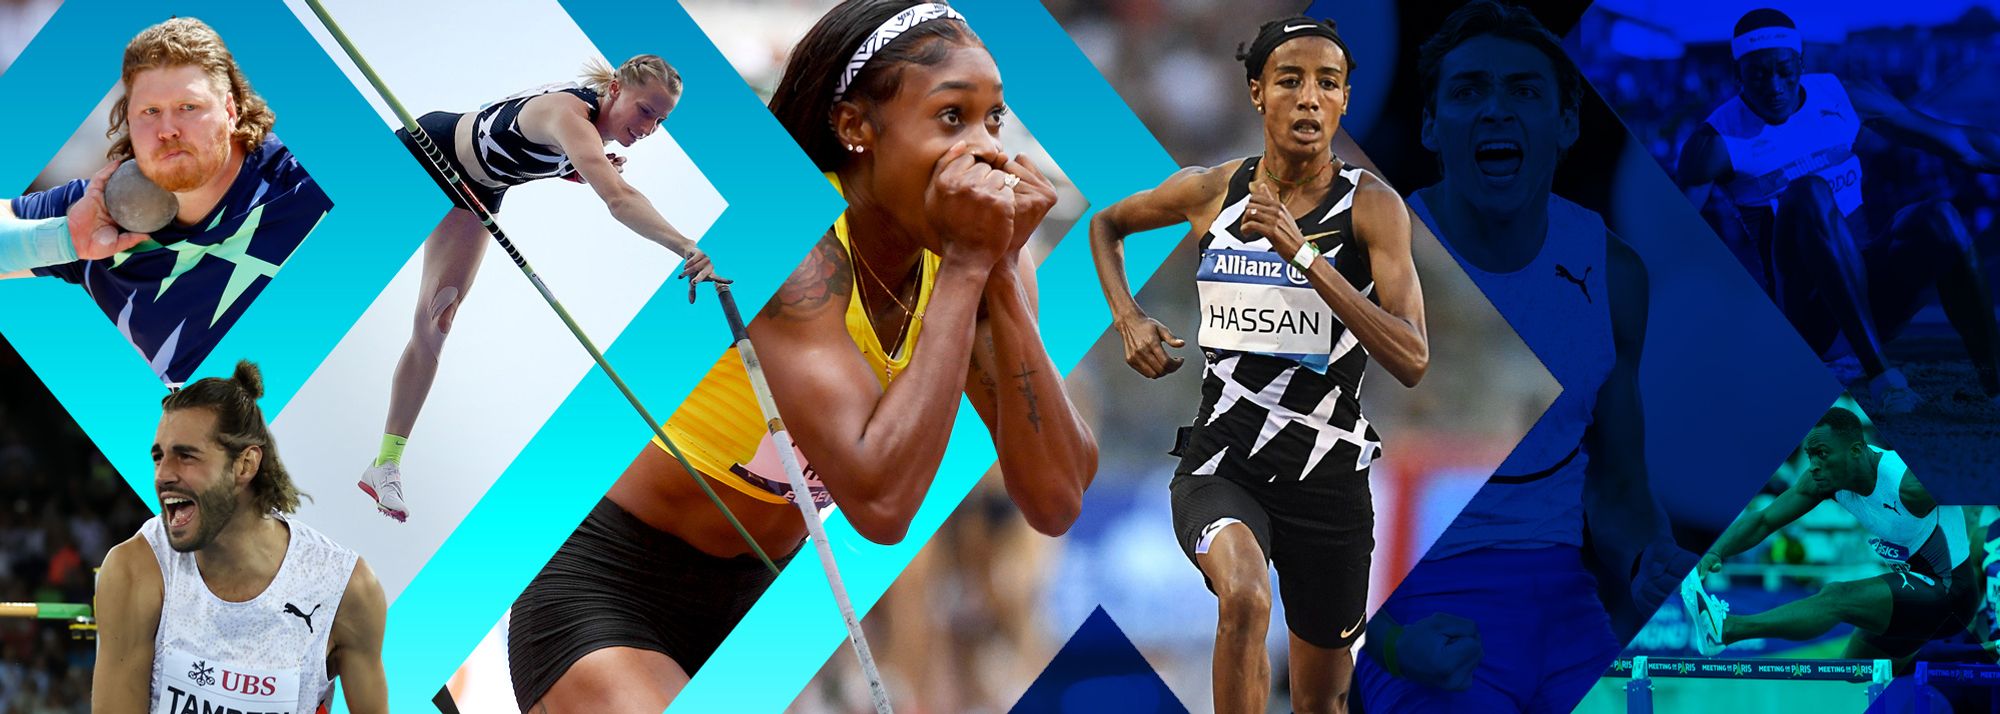 In the second of a two-part series, we look back at the highlights of a memorable 2021 Wanda Diamond League season.